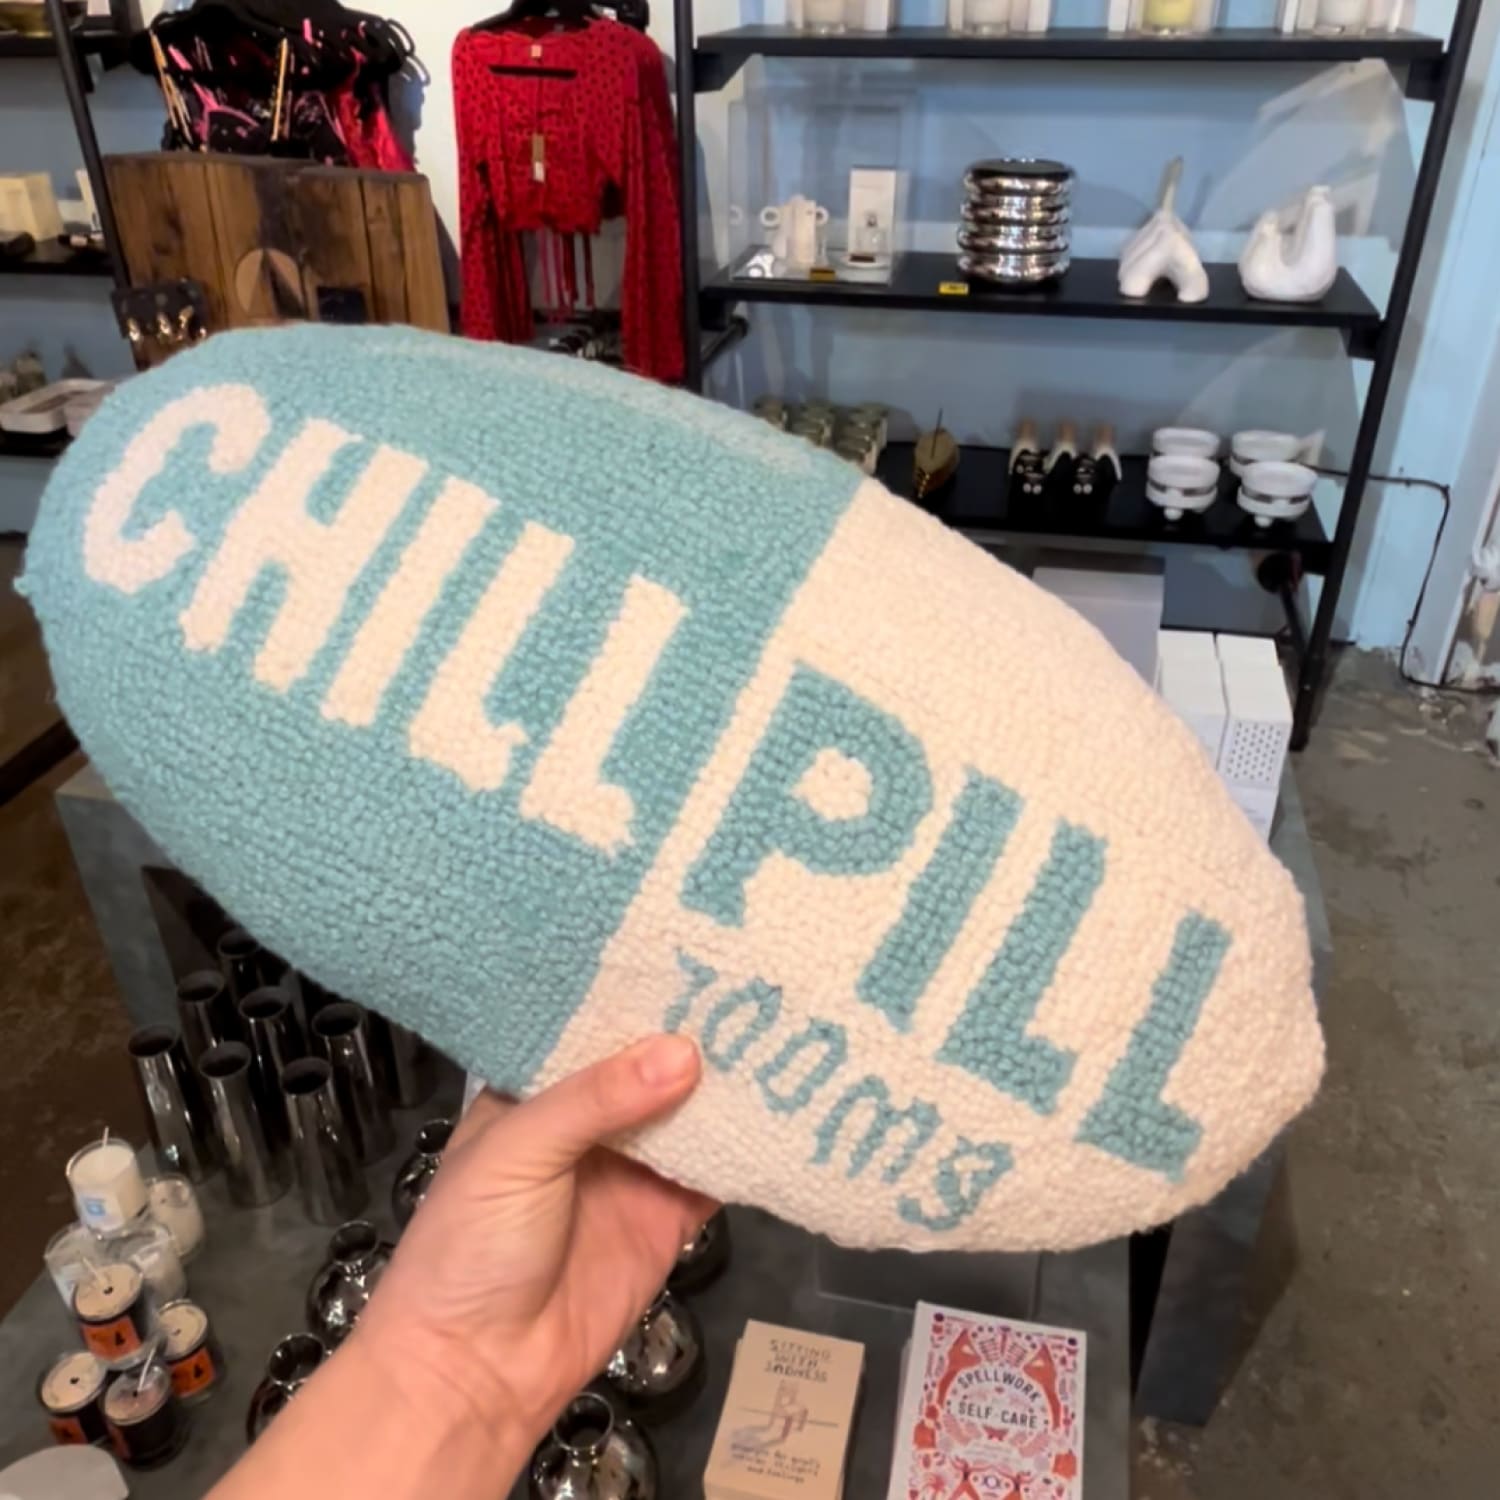 Chill Pill Pillow 0323 - Aapiowned - Q123 - Womenowned